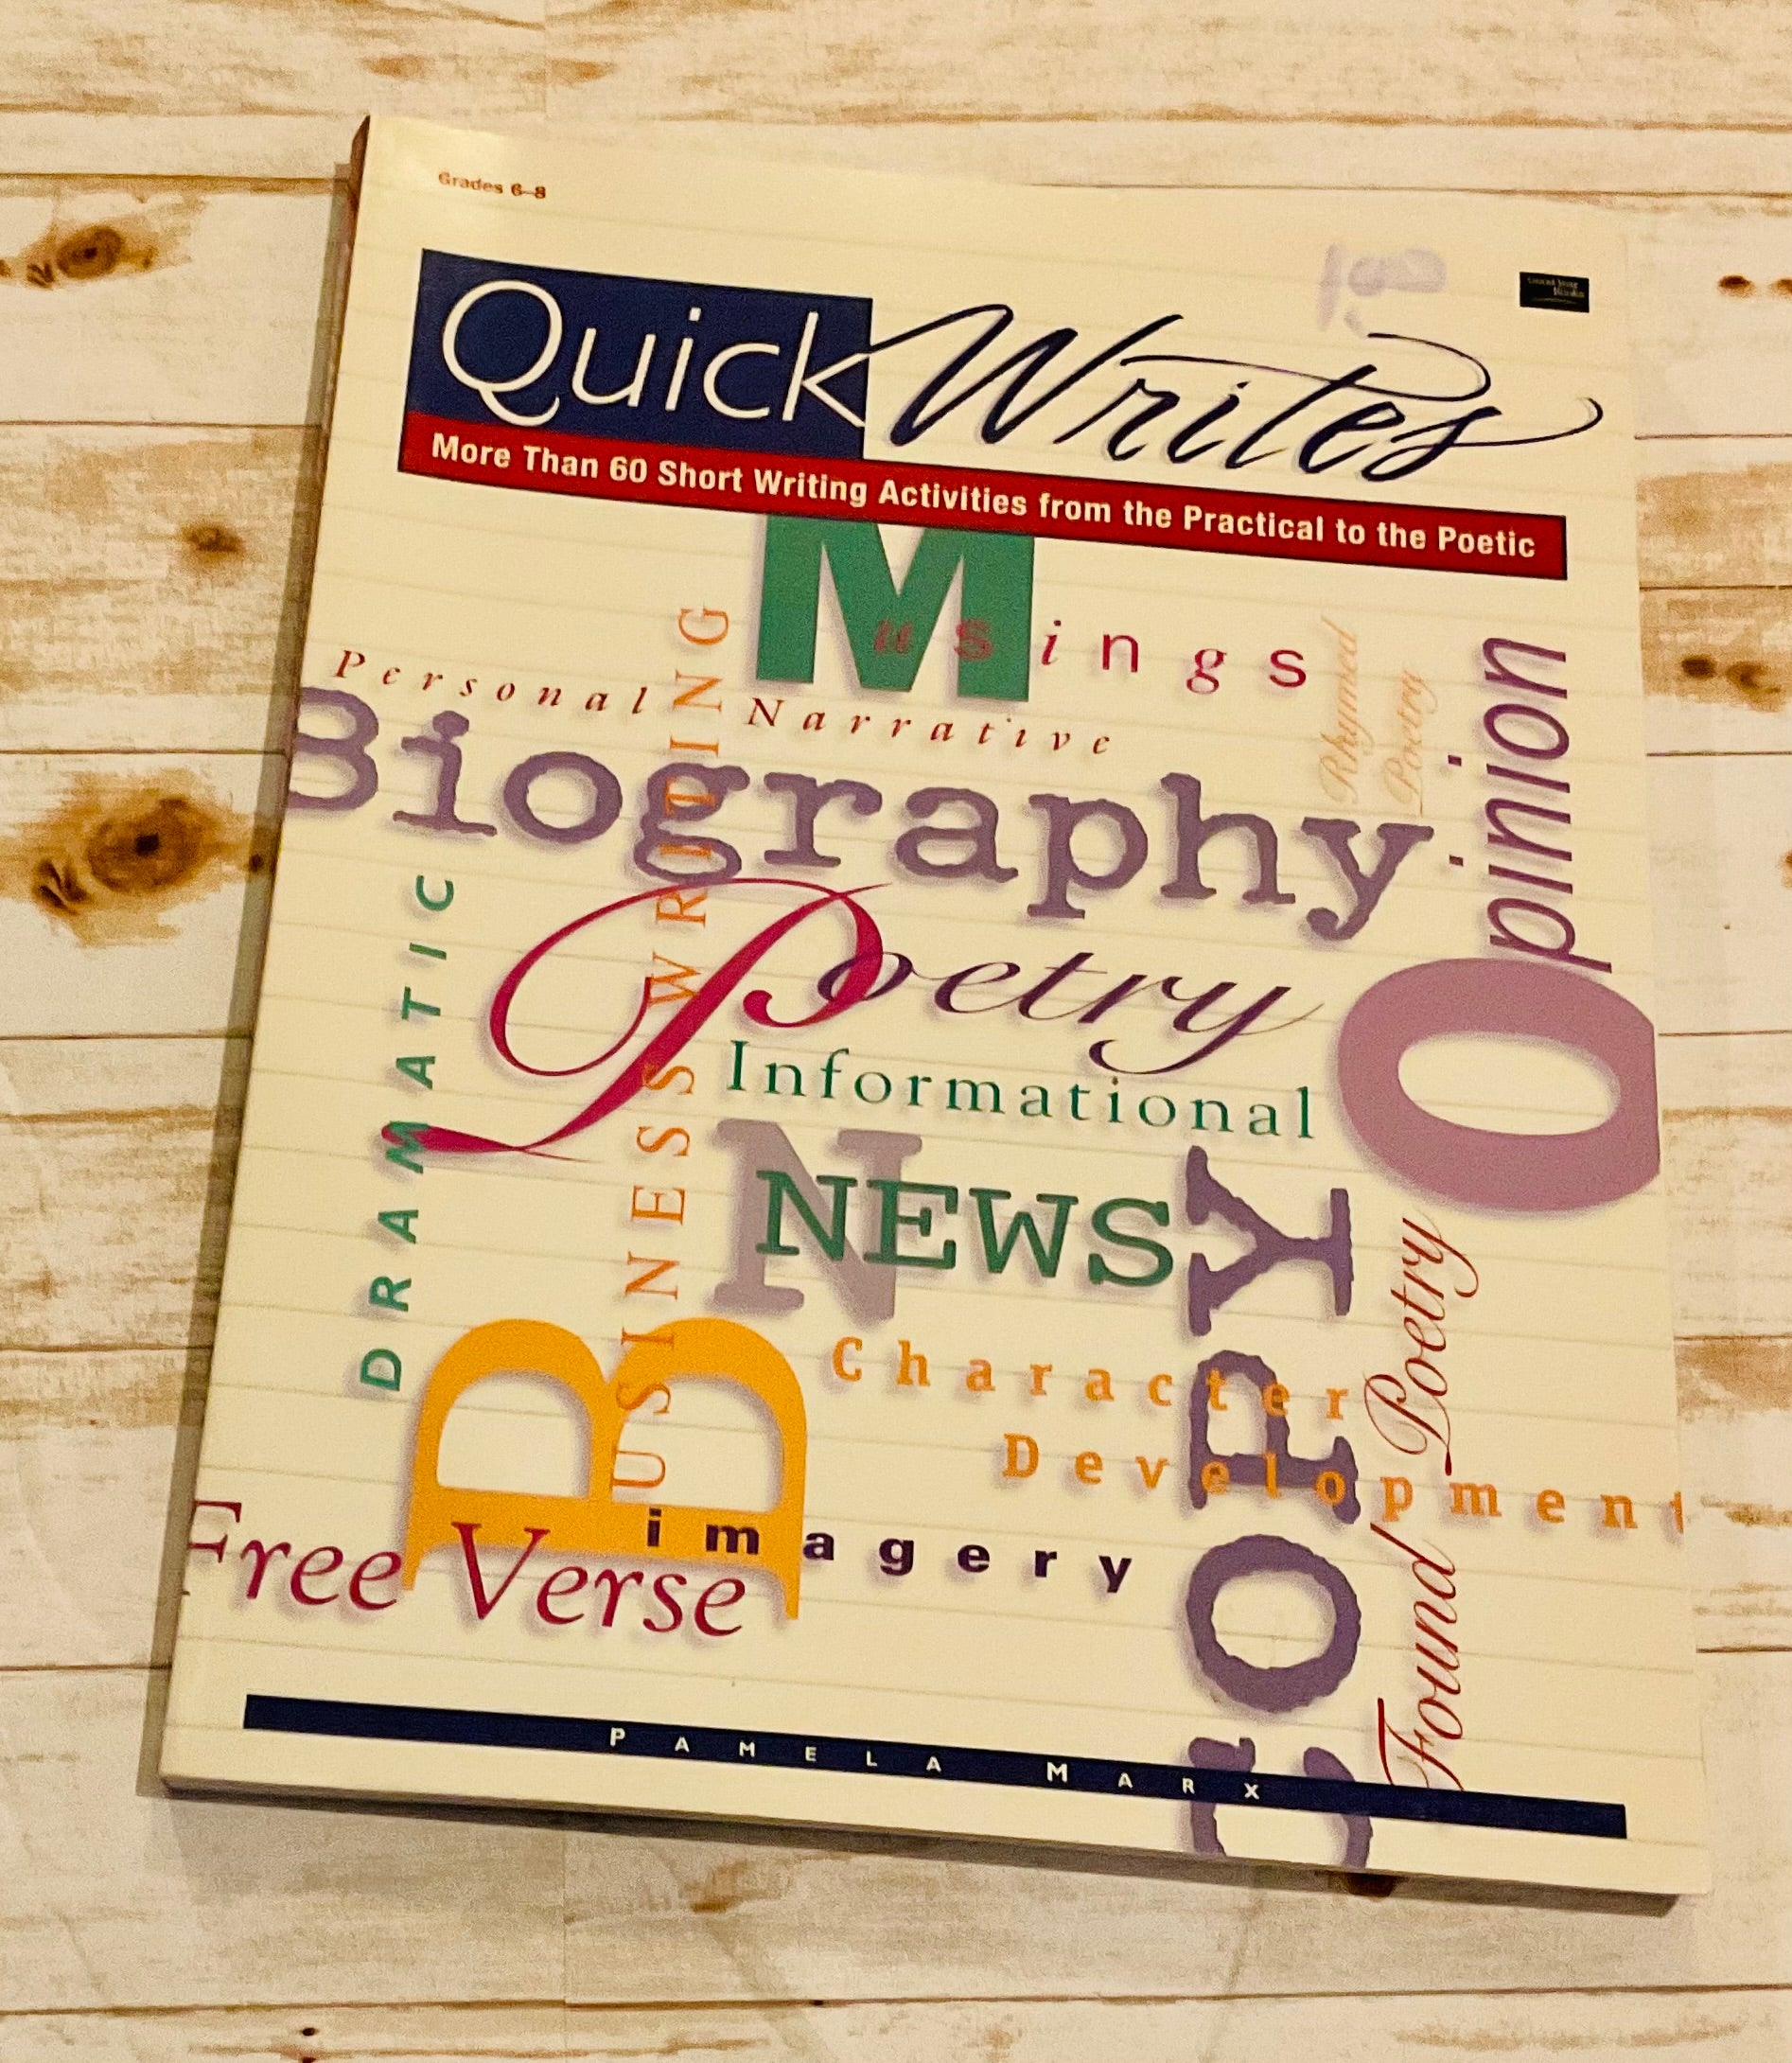 Quick Writes - More than 60 Short Writing Activities from the Practical to the Poetic - Anchored Homeschool Resource Center